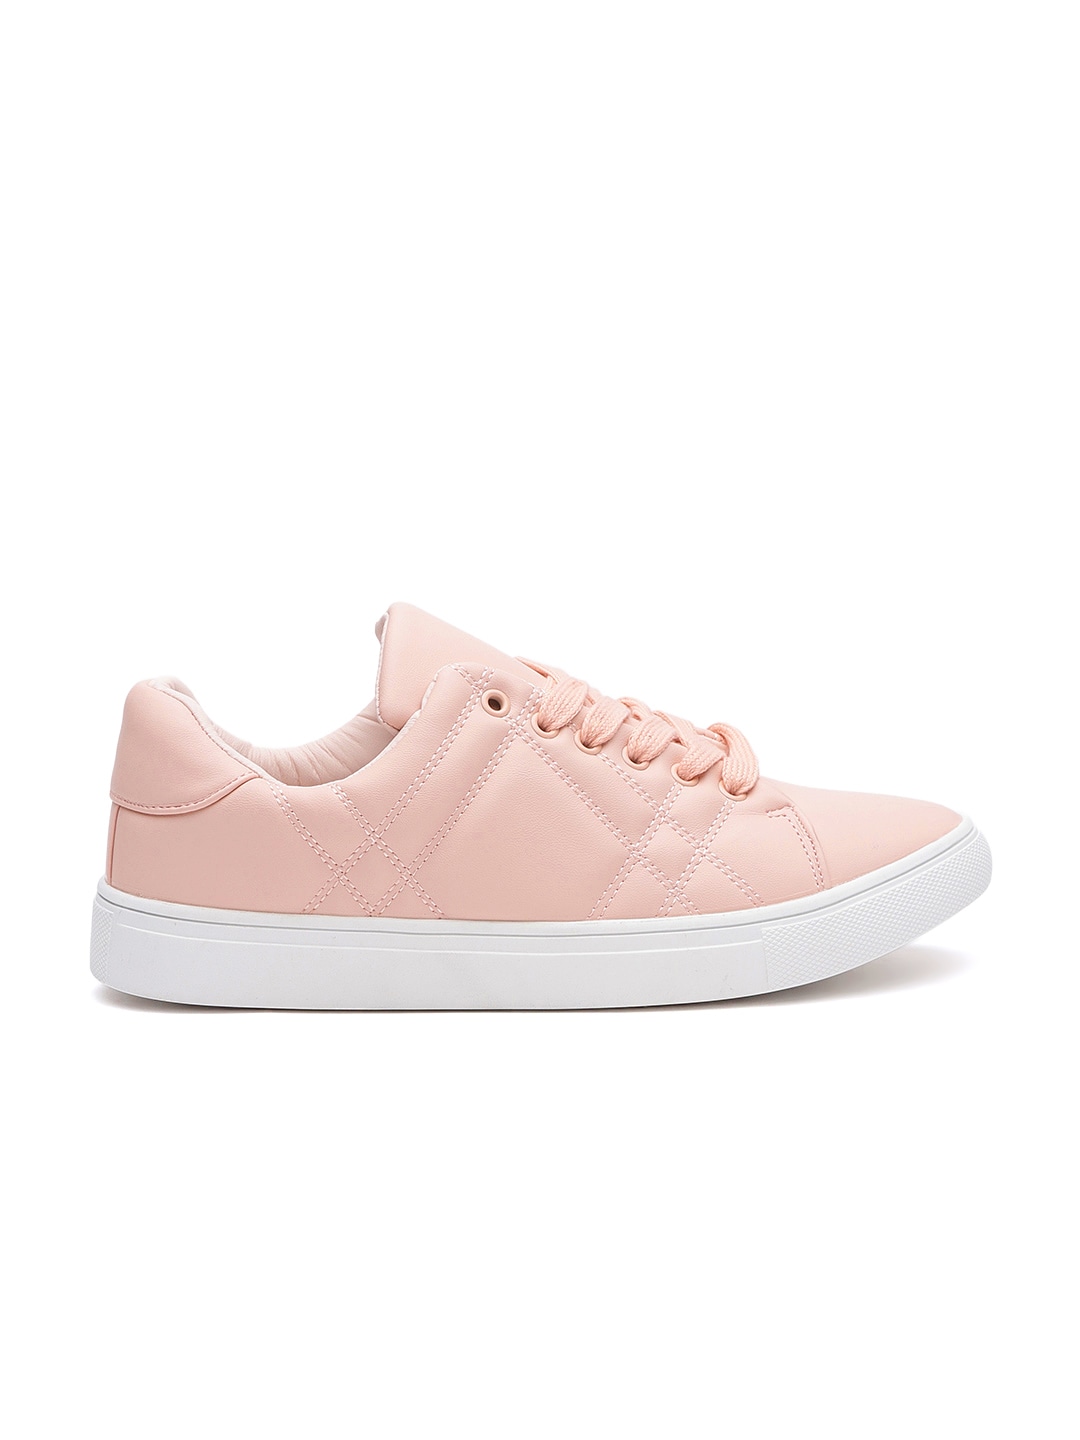 ether Women Peach-Coloured Sneakers Price in India